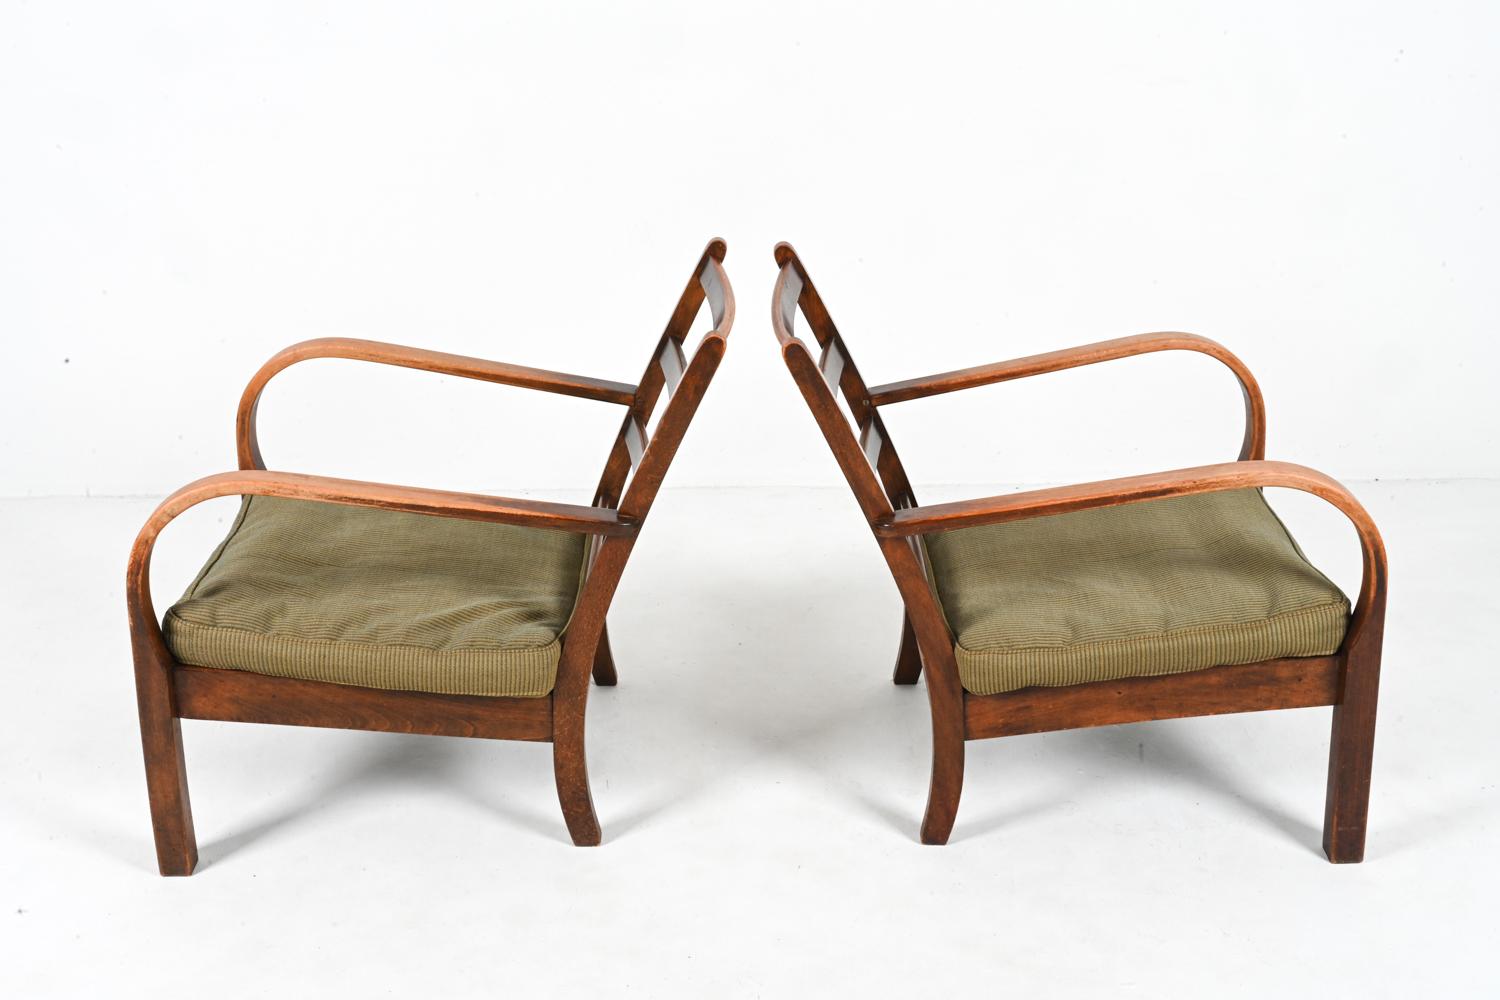 Pair of Art Deco Oak Lounge Chairs Attributed to Frits Schlegel for Fritz Hansen For Sale 4